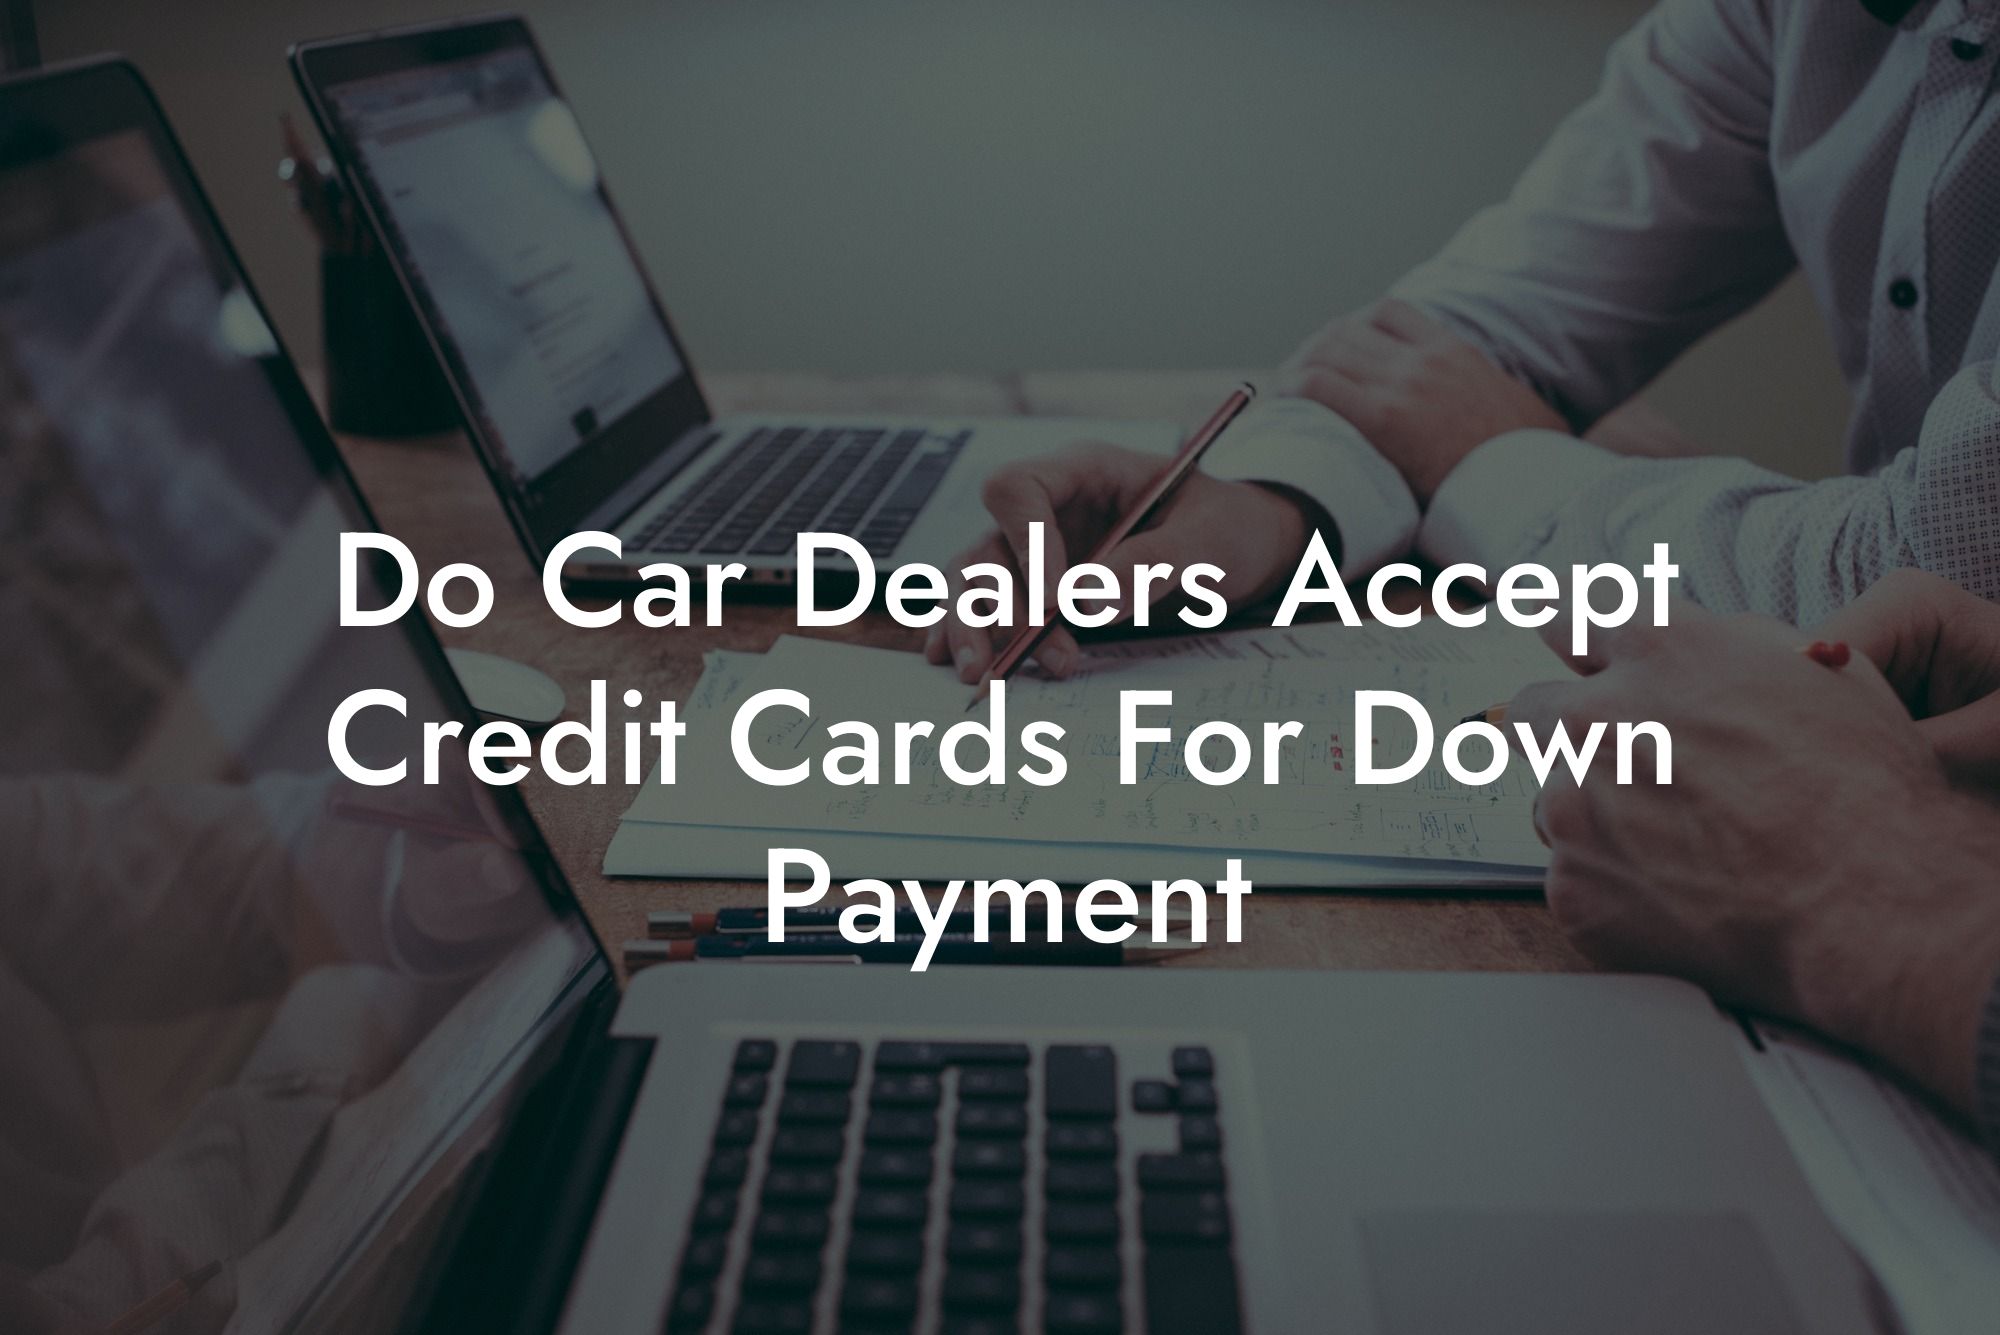 Do Car Dealers Accept Credit Cards For Down Payment